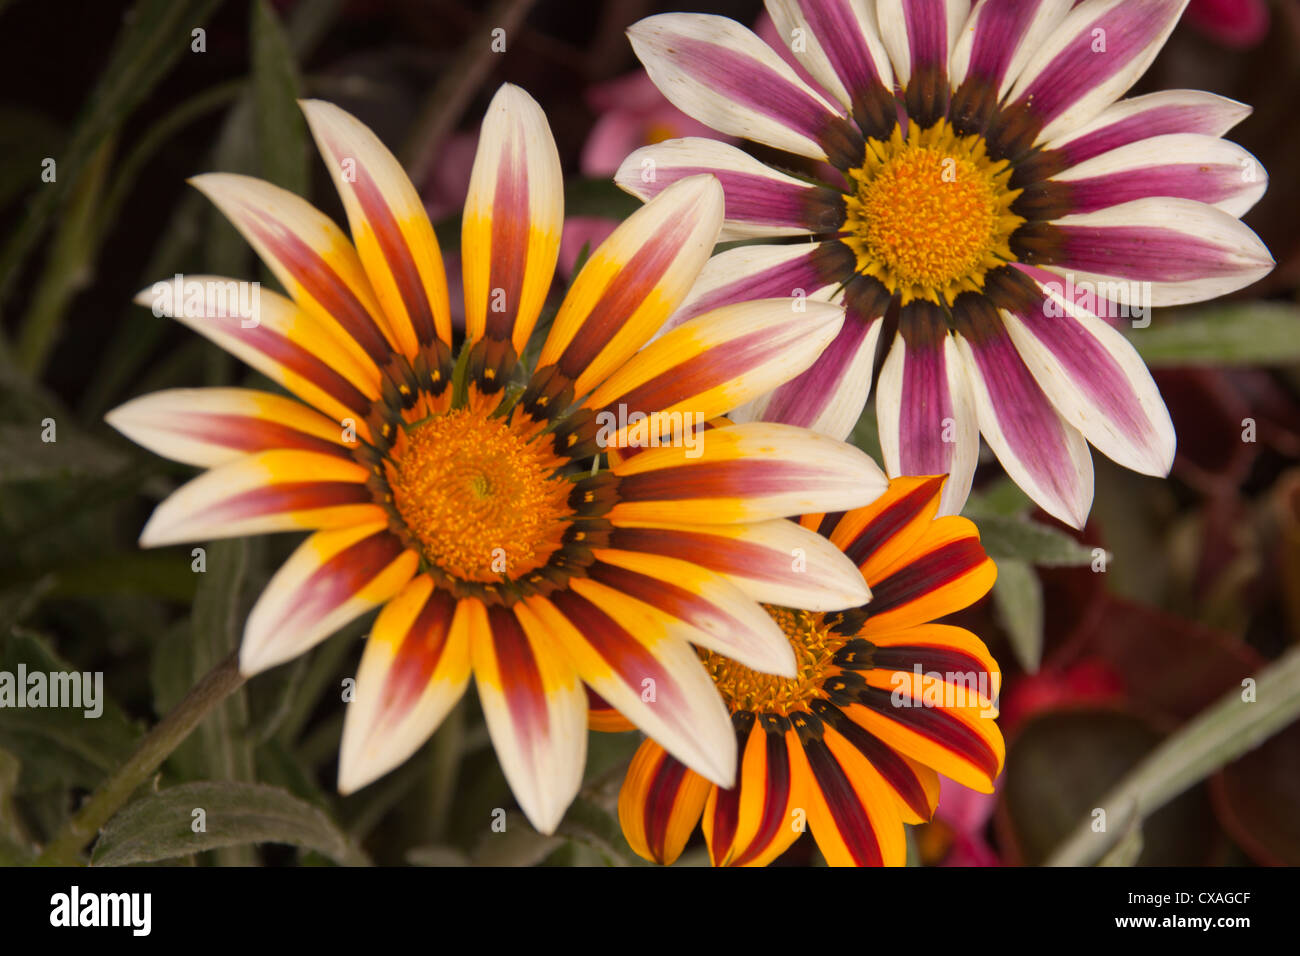 Bright colorful Gazania cultivar flowers member of Asteraceae family. Stock Photo